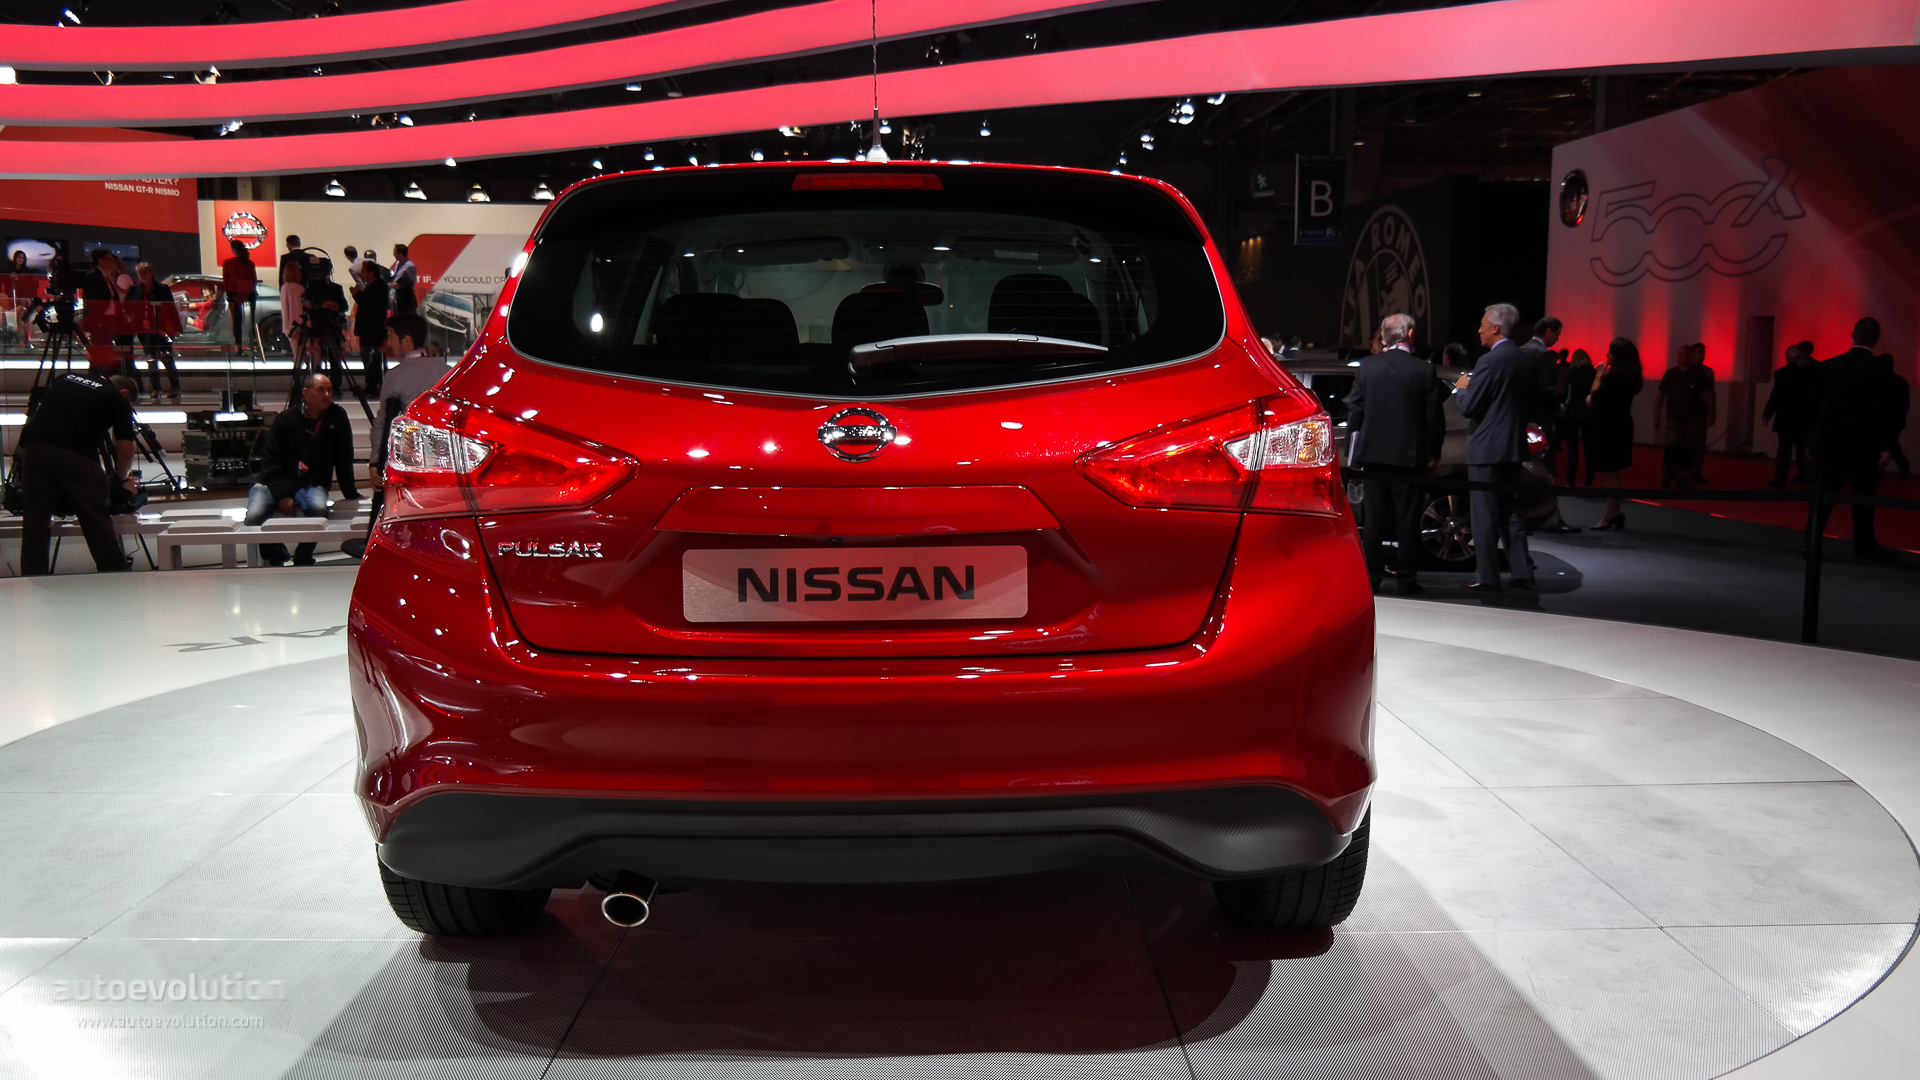 nissan-pulsar-completes-the-companys-line-up-at-paris-photo-gallery_8